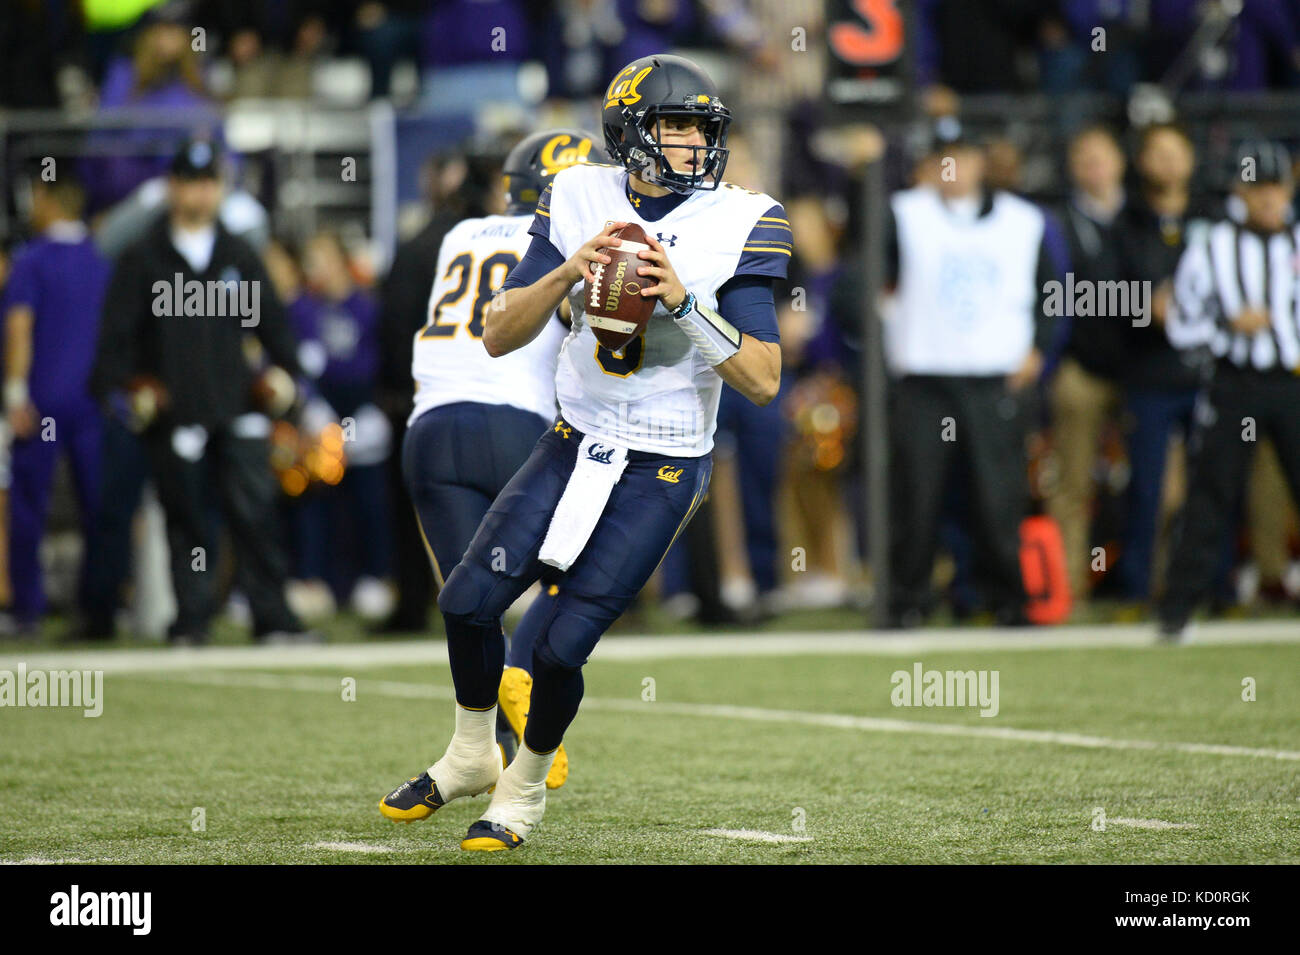 Seattle, WA, USA. 7th Oct, 2017. Cal quarterback Ross Bowers (3) in action during a PAC12 football game between the Cal Bears and the Washington Huskies. The game was played at Husky Stadium on the University of Washington campus in Seattle, WA. Jeff Halstead/CSM/Alamy Live News Stock Photo